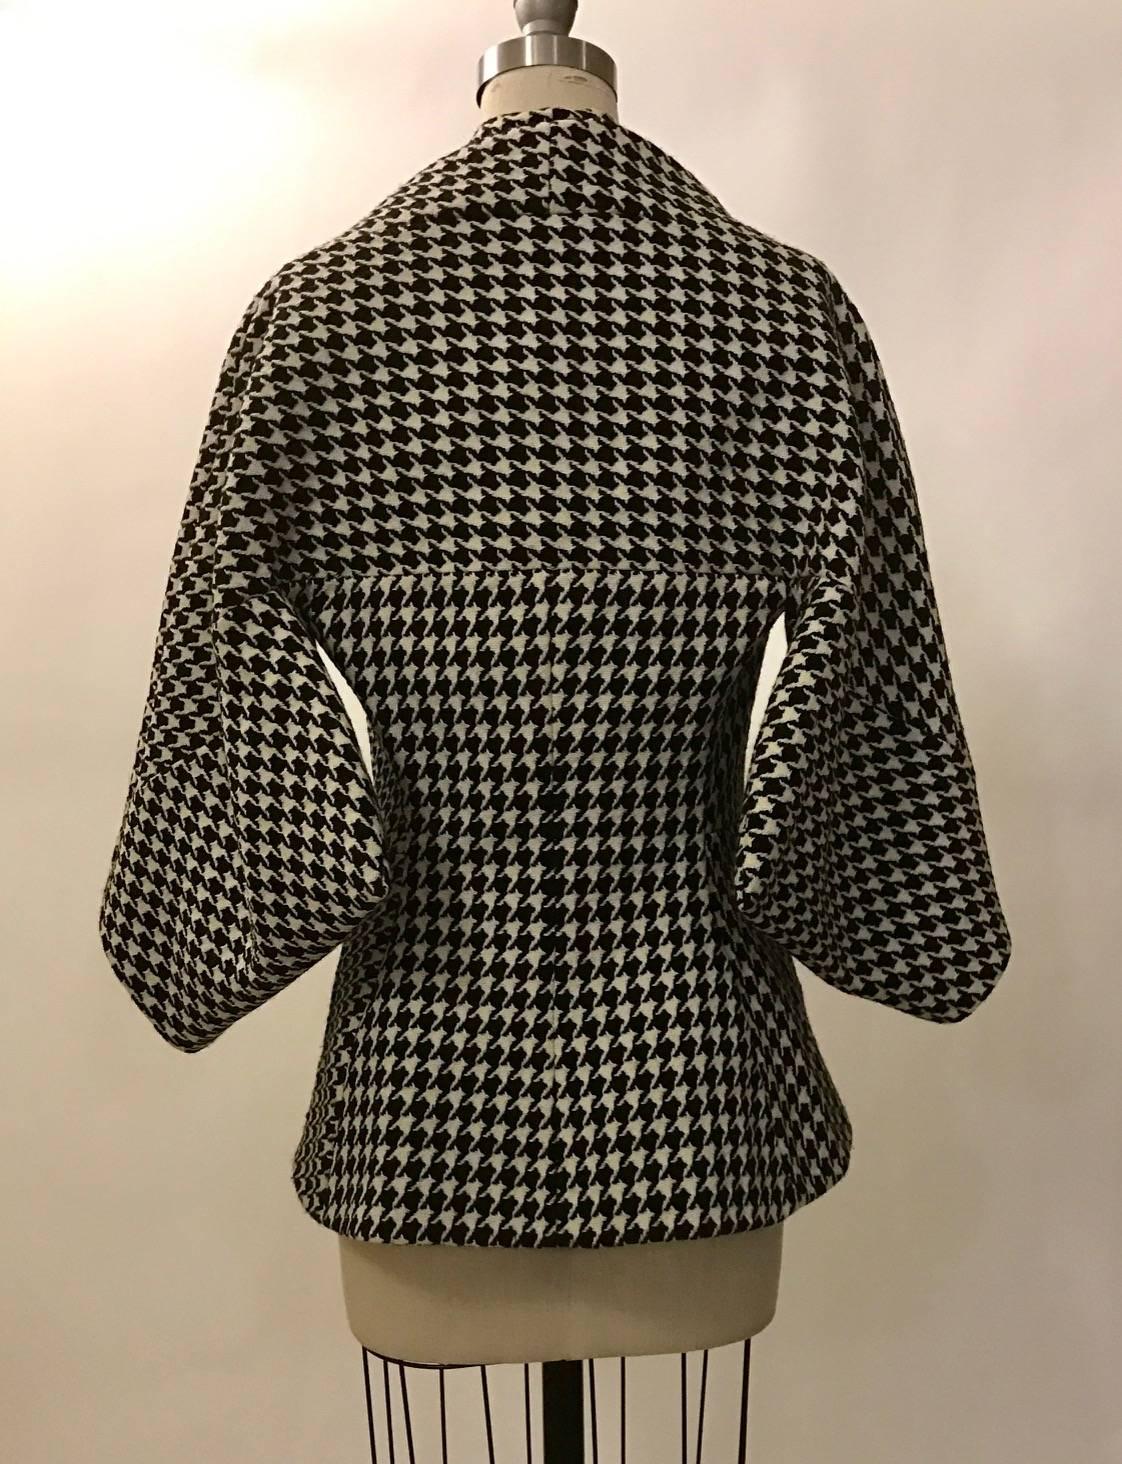 Alexander McQueen black and white dogtooth wool jacket from the 2009 Horn of Plenty collection. Jacket features a kimono like sleeve and pleat detail at shoulder. Fastens with three concealed buttons at front. 

100% virgin fleece wool.
Fully lined